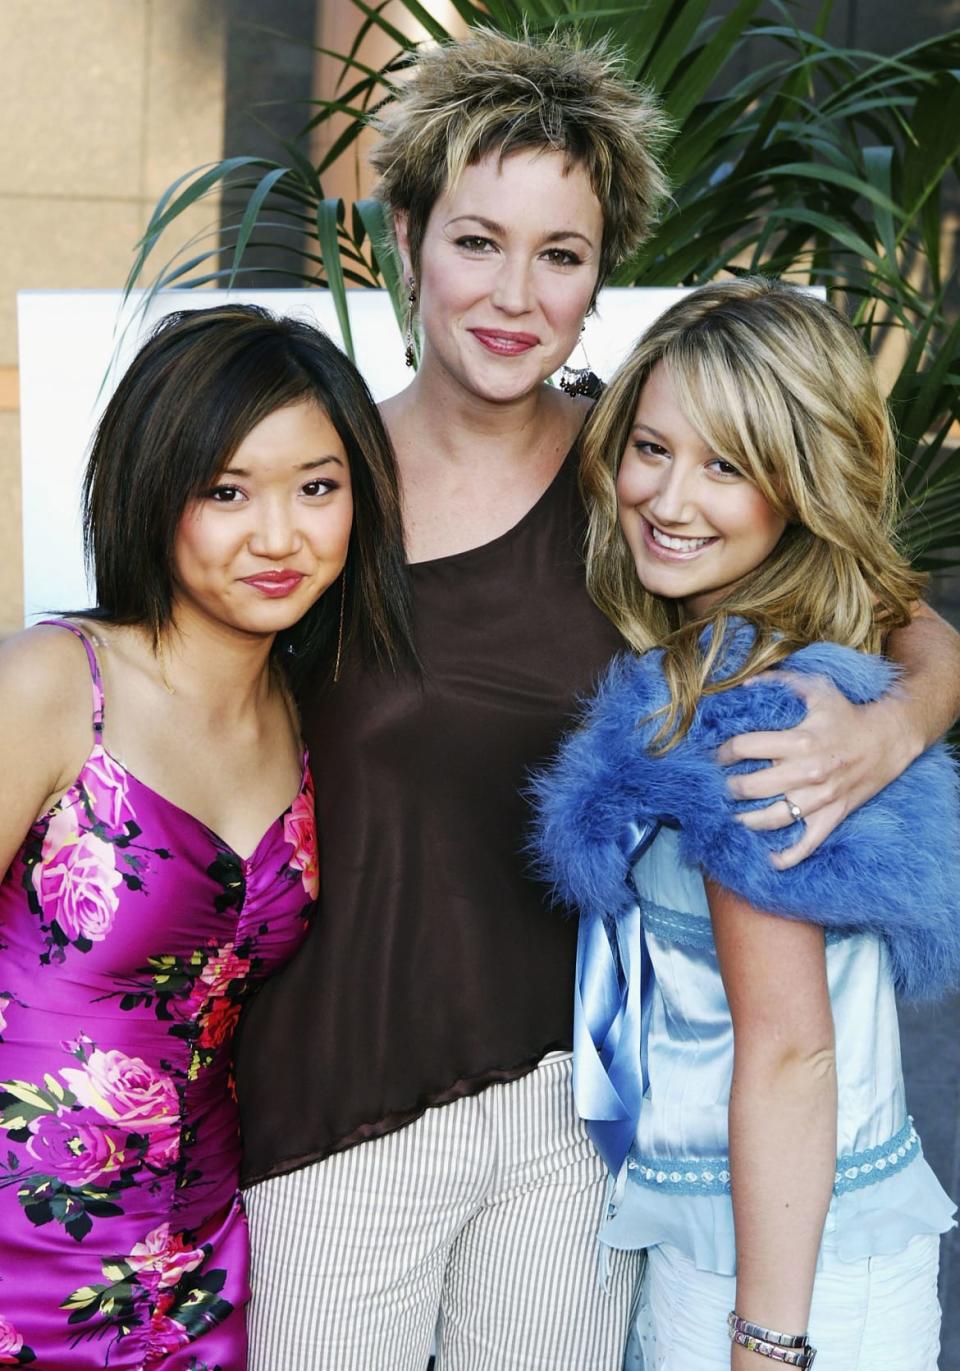 <div class="inline-image__caption"><p>Kim Rhodes (centre), Brenda Song (left) and Ashely Tisdale (right) arrive for the Disney Channel Original Movies Los Angeles premiere of Tiger Cruise.</p></div> <div class="inline-image__credit">Frazer Harrison</div>